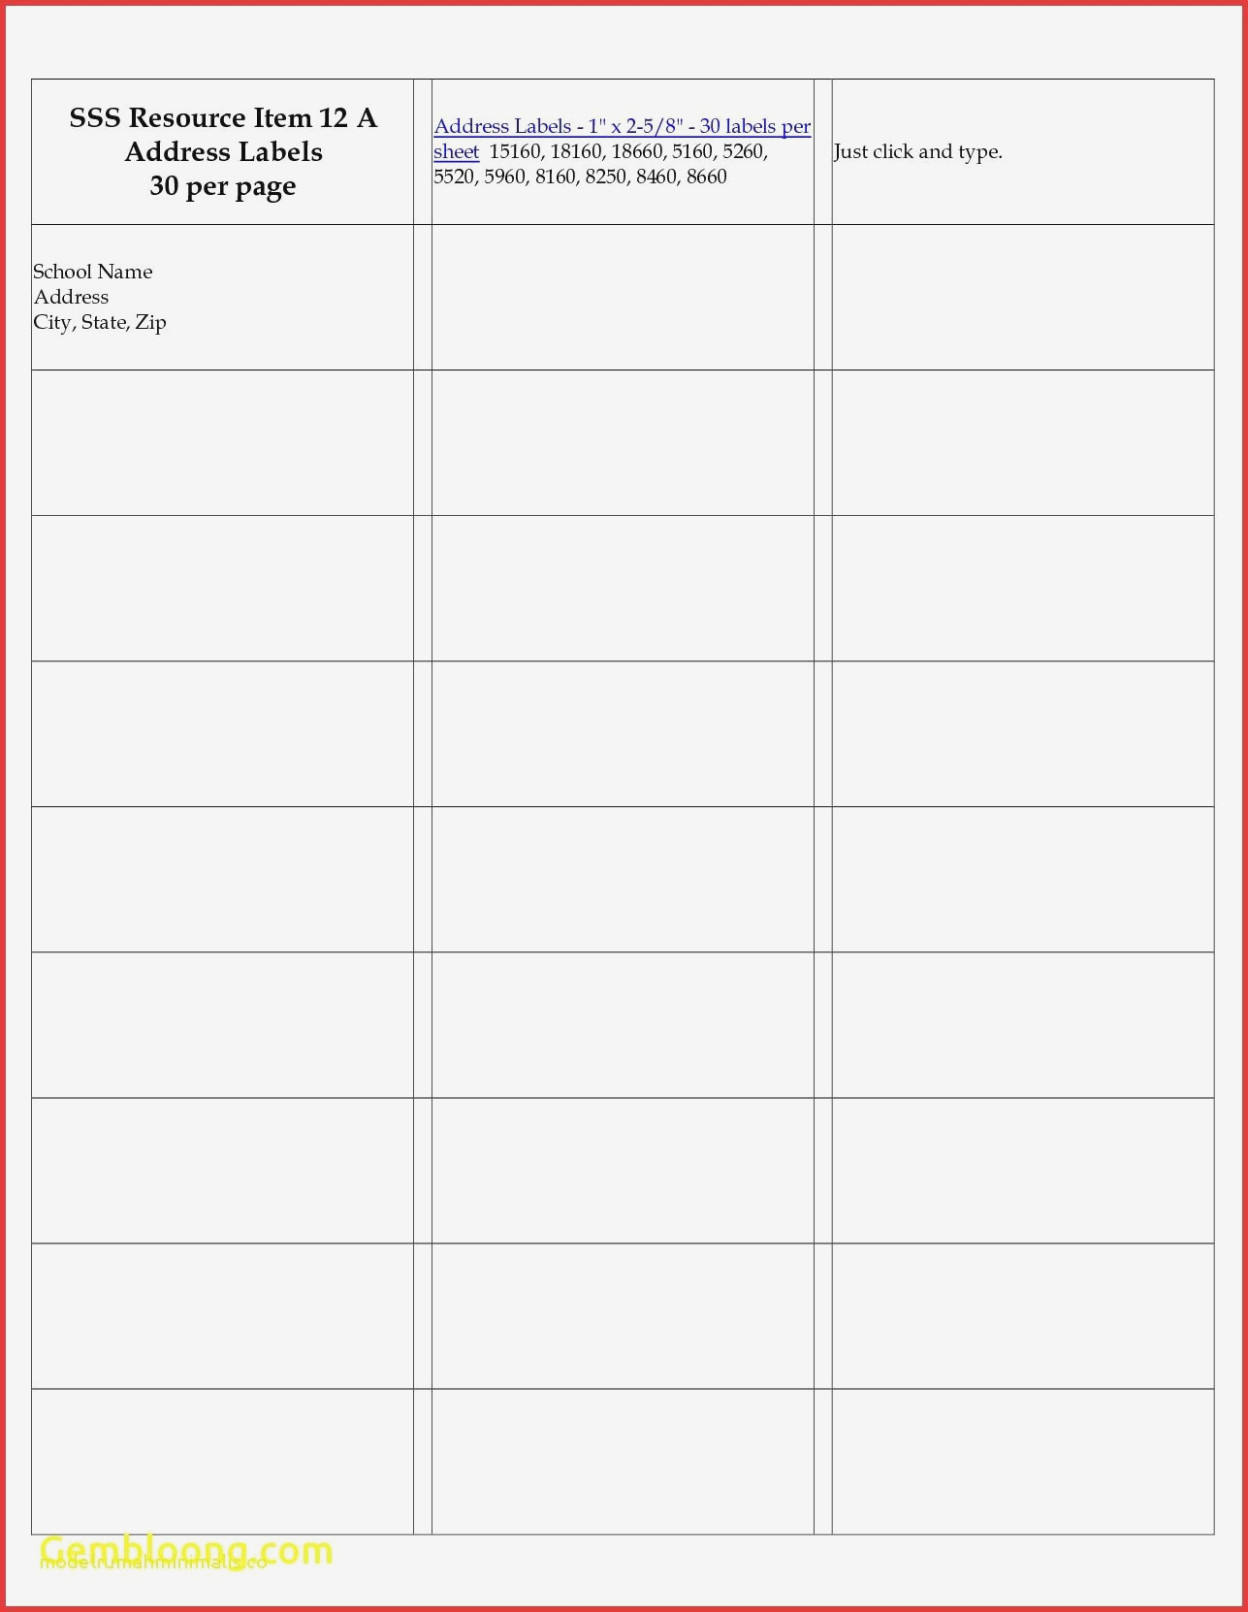 how-do-i-print-address-labels-from-google-spreadsheet-with-regard-to